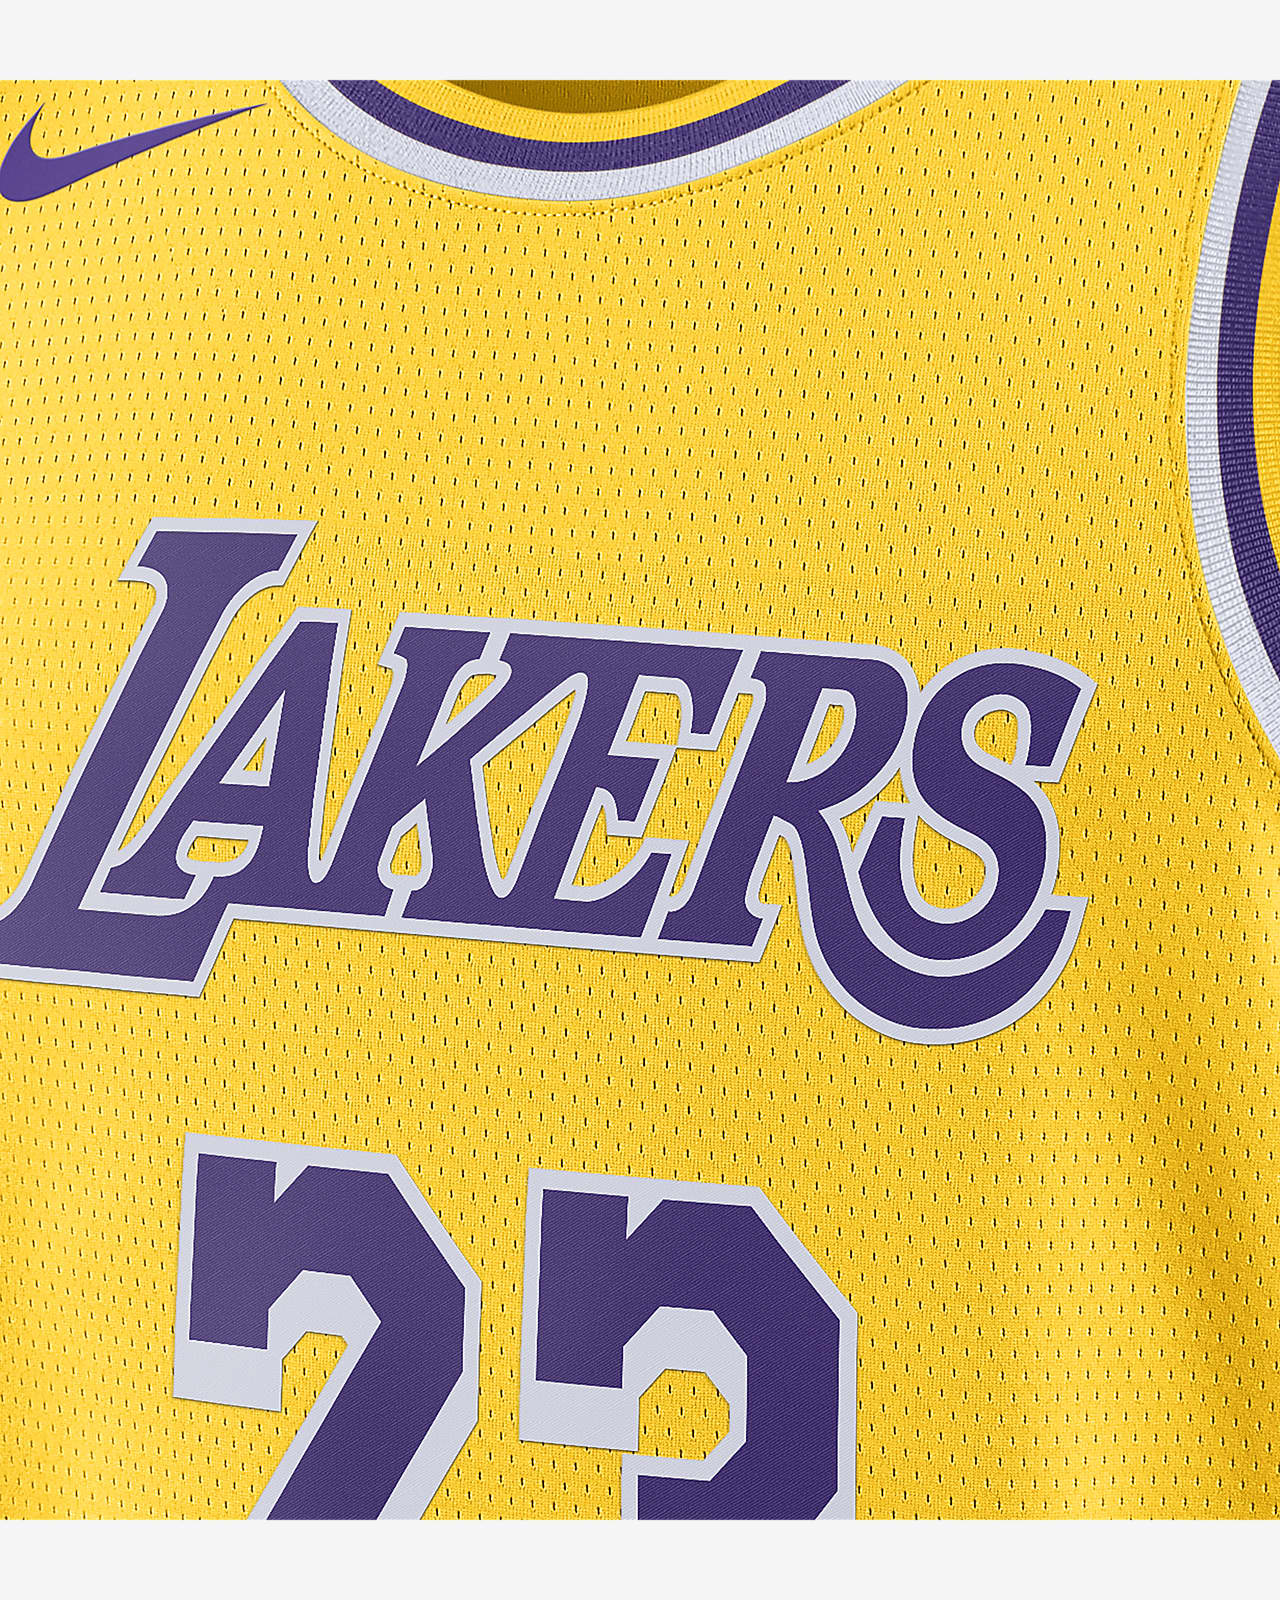 lakers jersey home and away